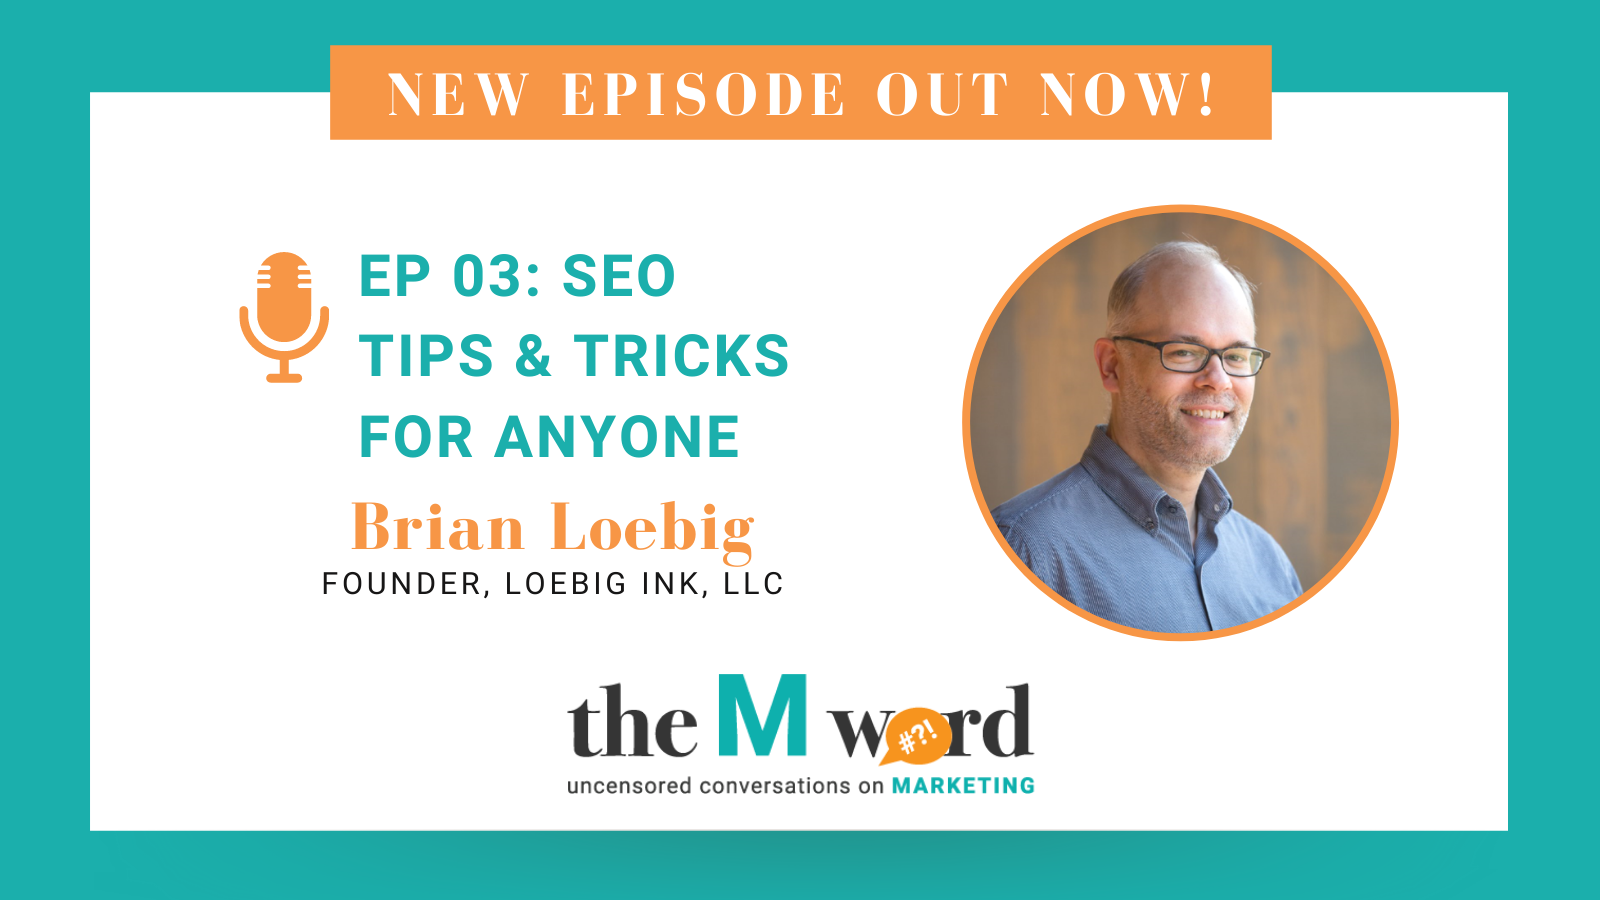 Episode 3 of The M Word with Brian Loebig - SEO Tips & Tricks for Anyone